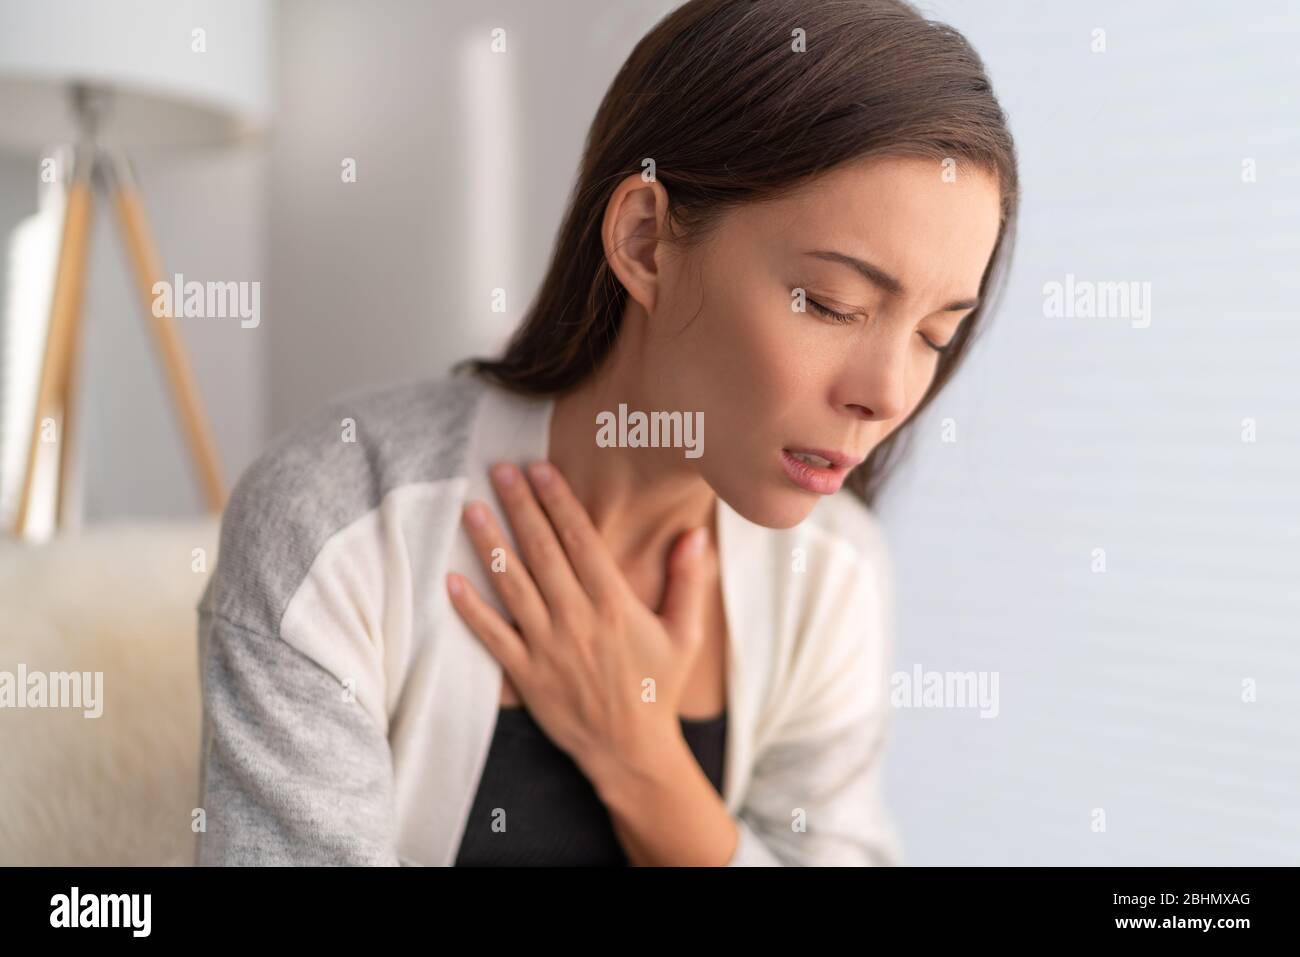 COVID-19 breathing difficulties woman with shortness of breath Coronavirus cough breathing problem. Asian girl in pain touching chest respiratory symptoms fever, coughing, body aches. Stock Photo